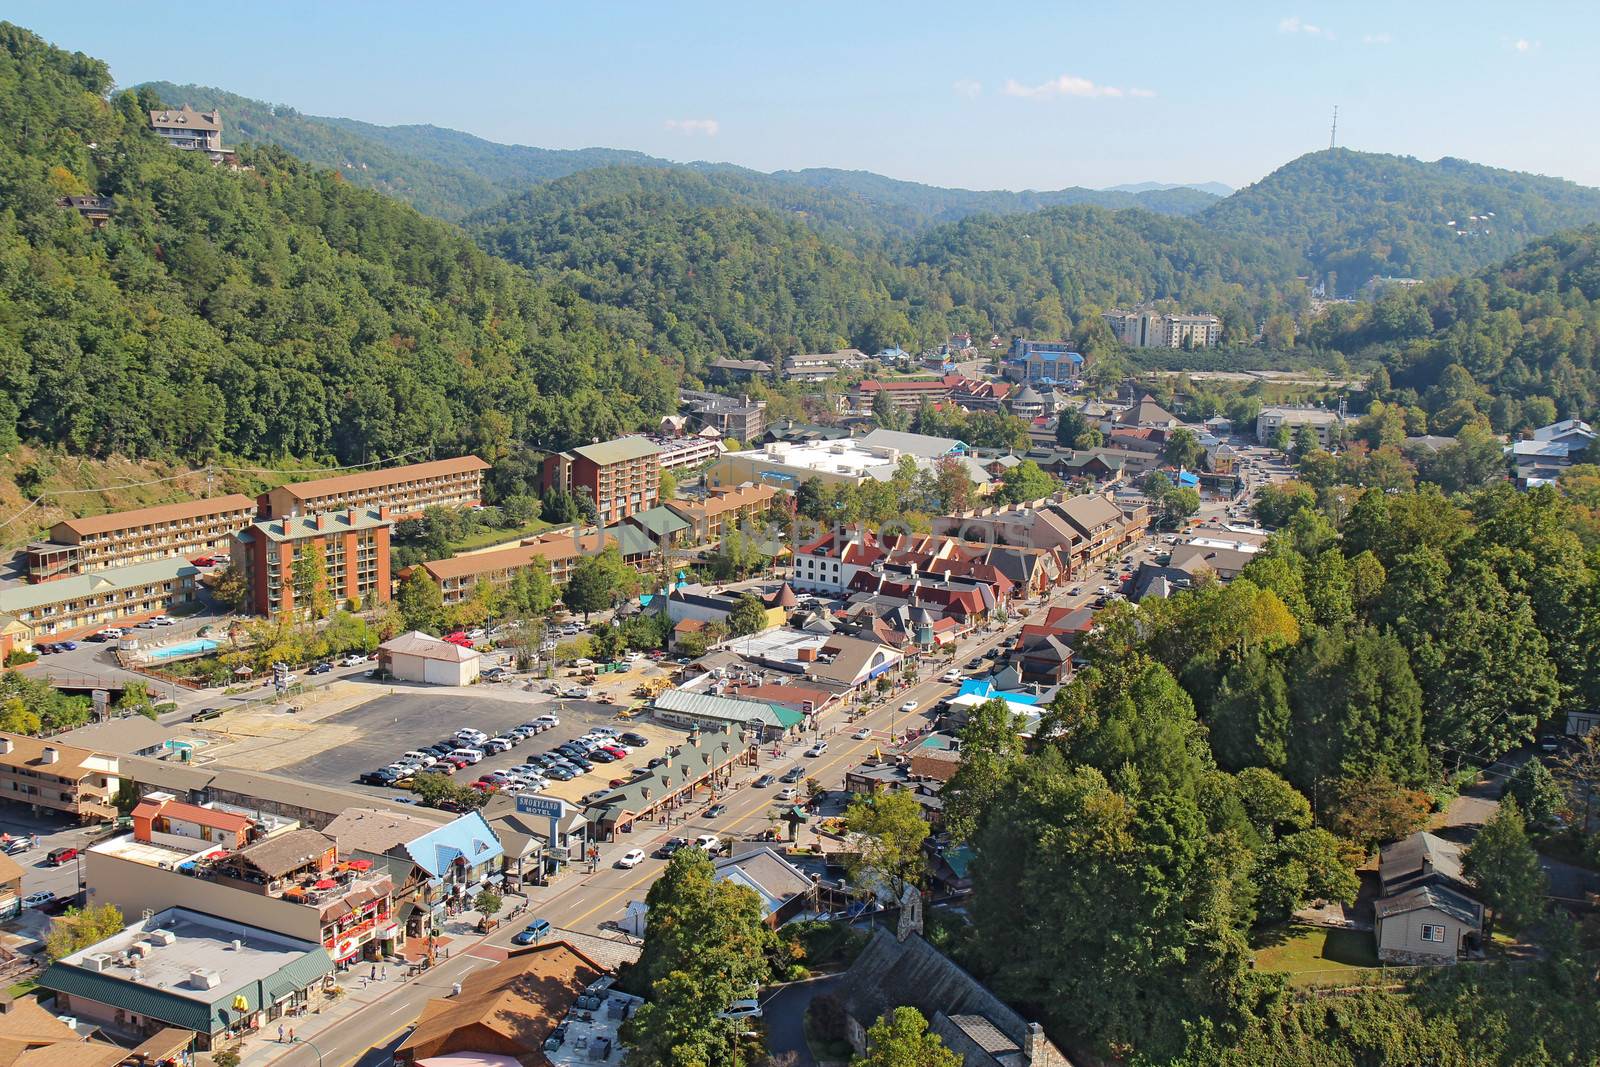 Aerial wide-angle view of the main road through Gatlinburg, Tenn by sgoodwin4813